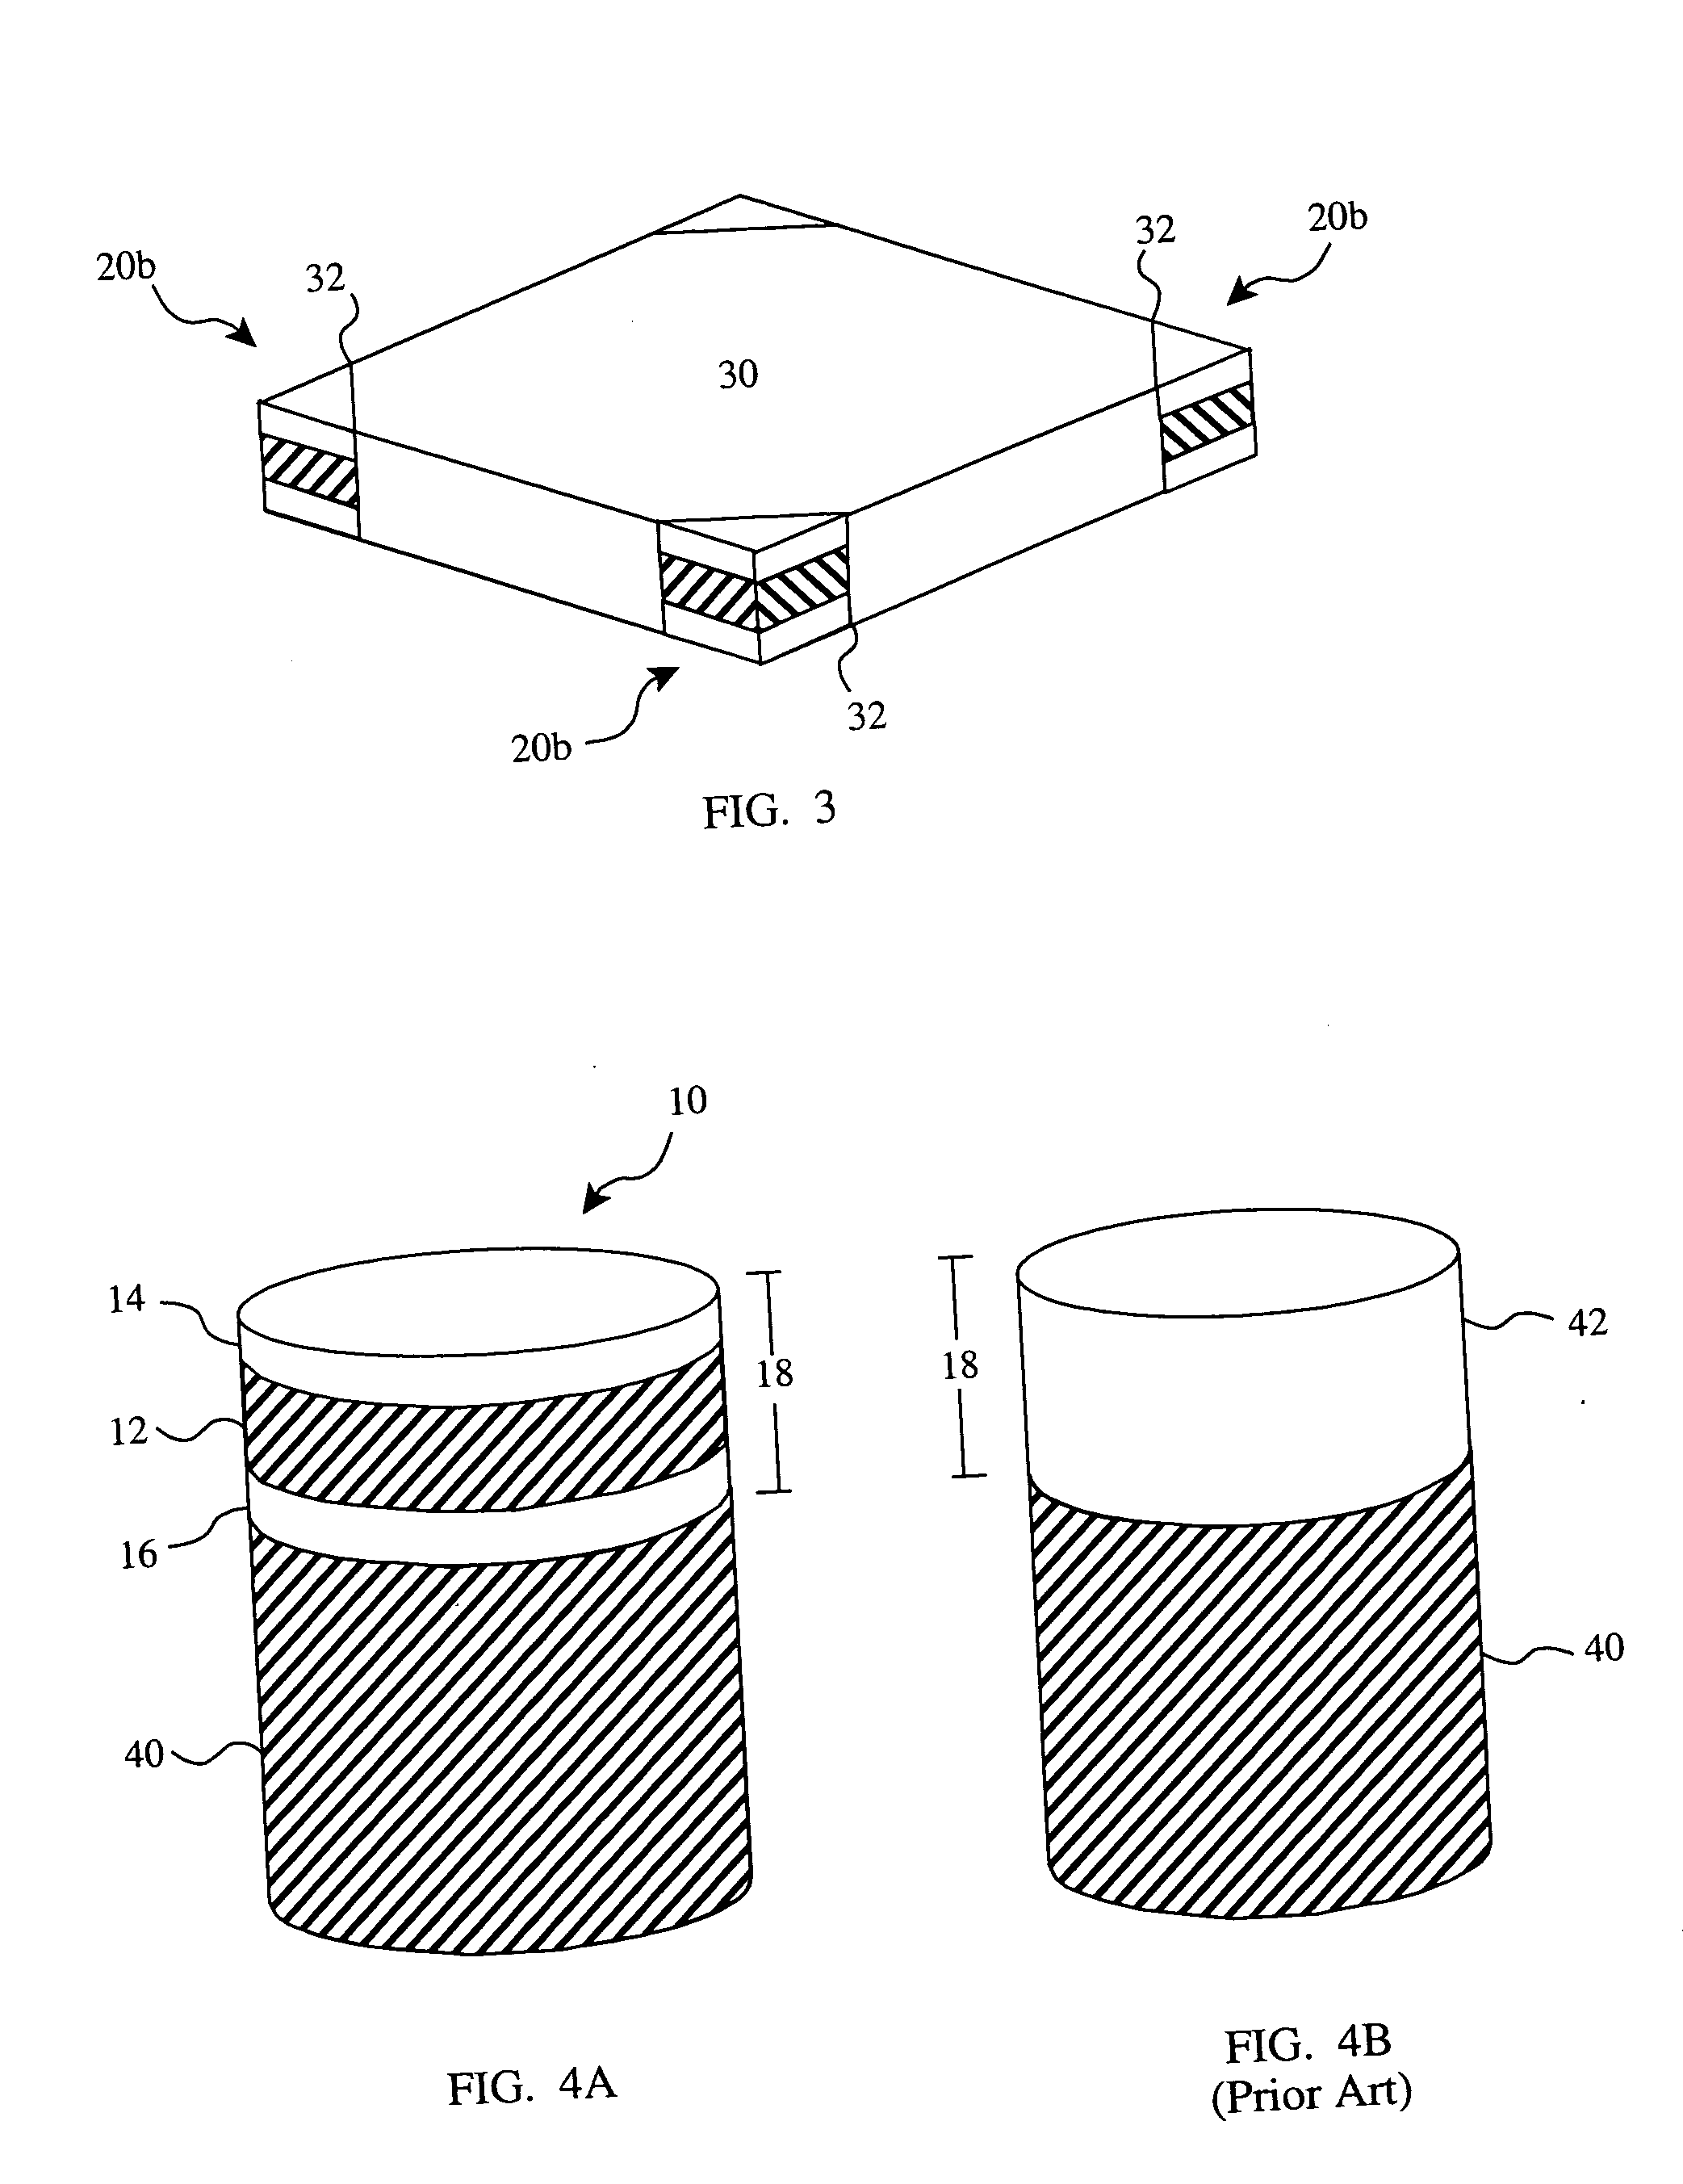 Doubled-sided and multi-layered PCD and PCBN abrasive articles